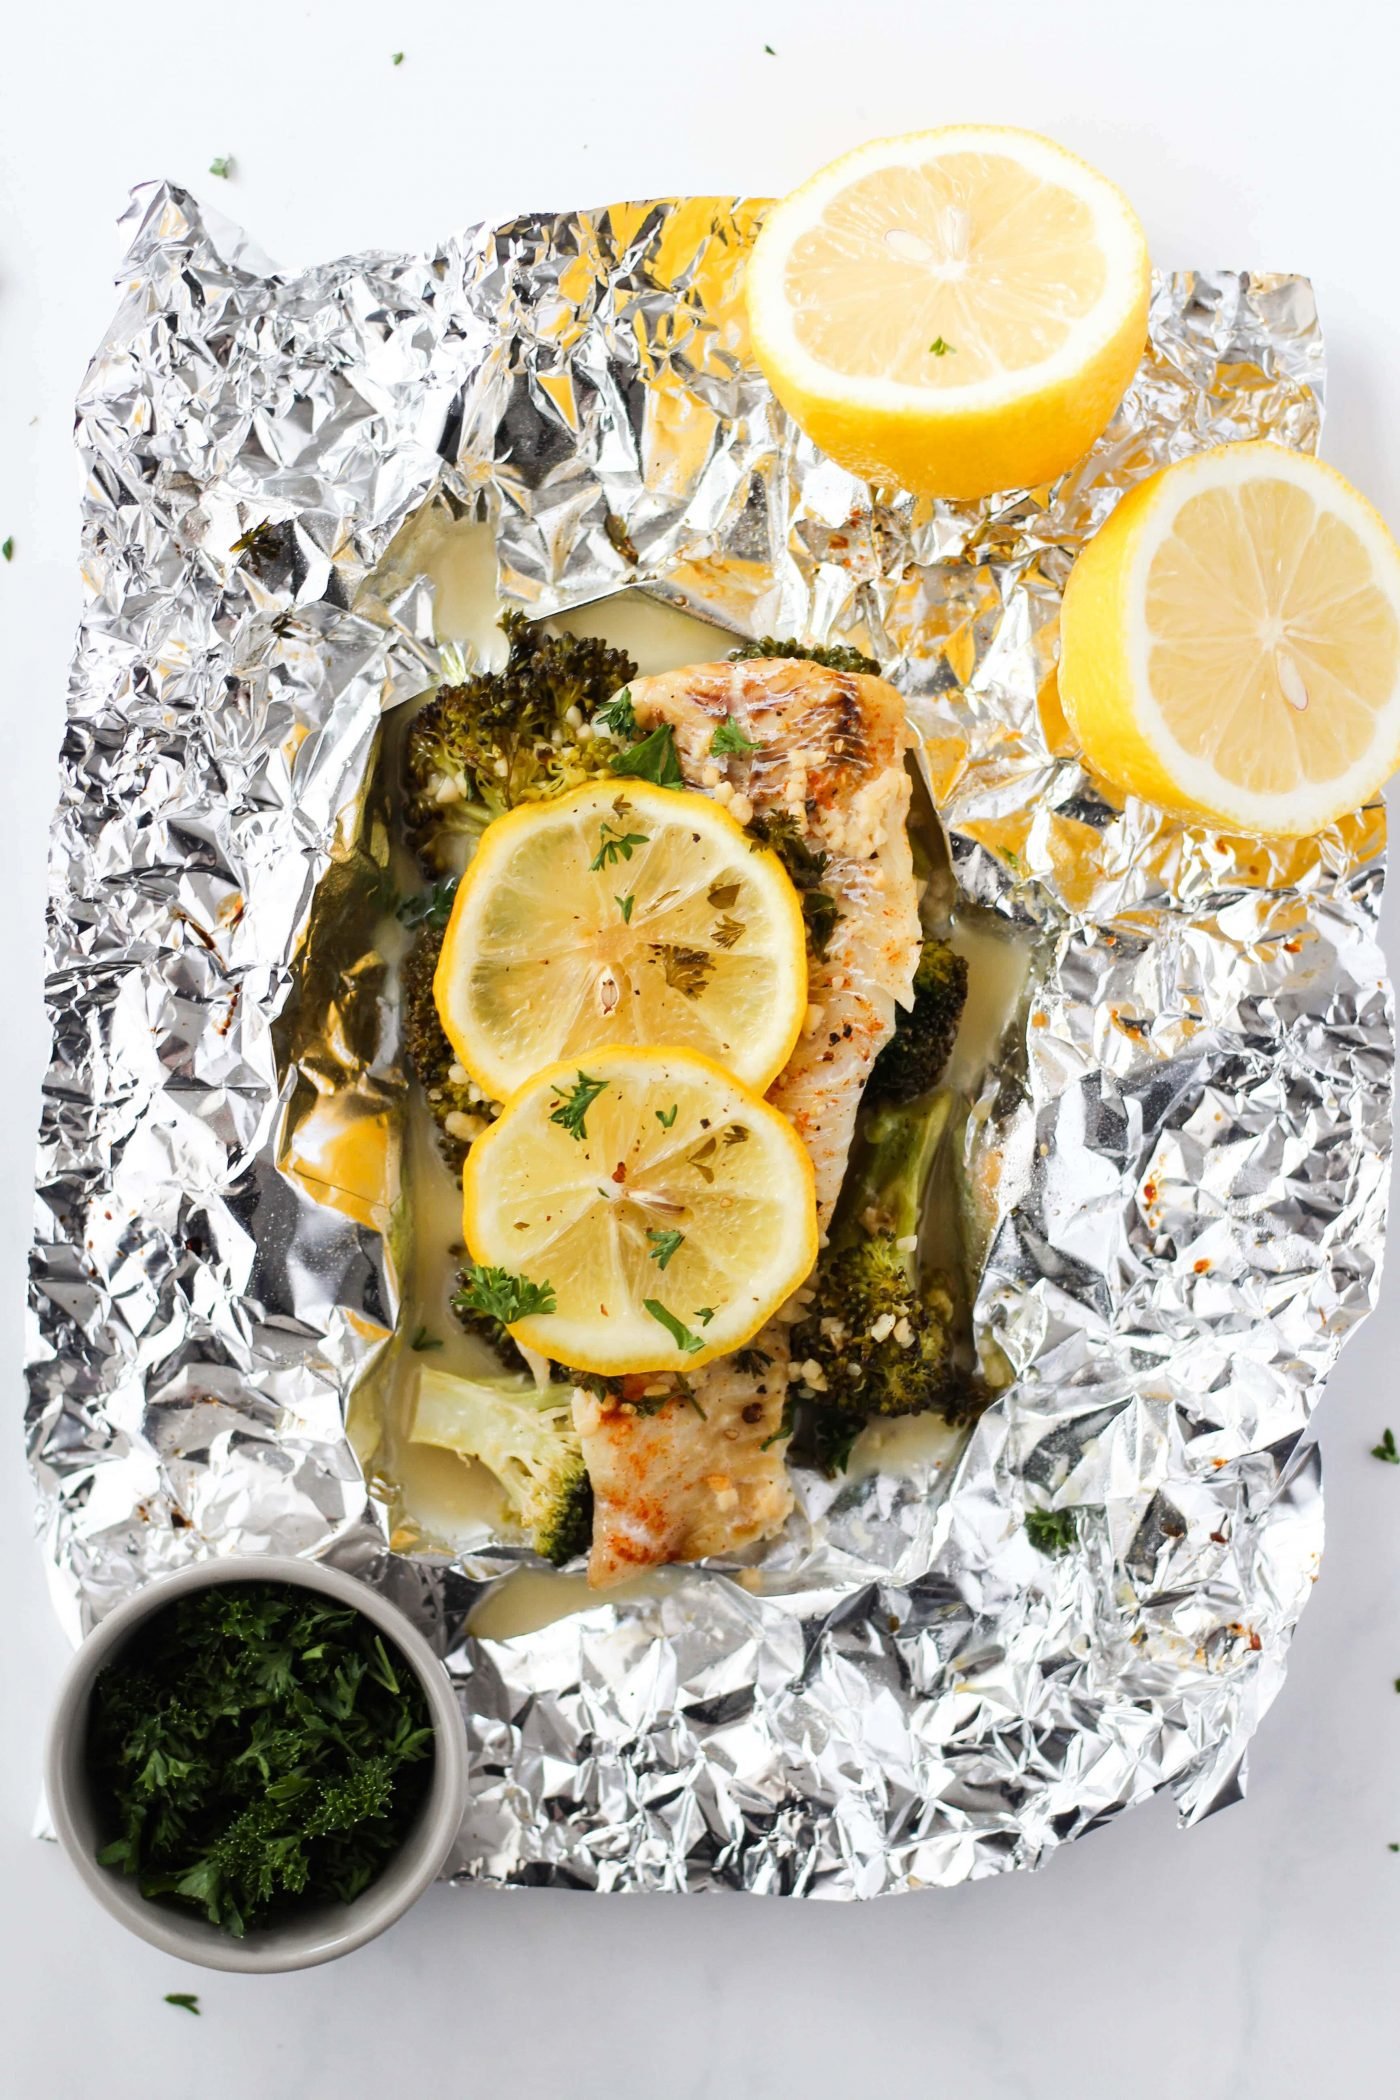 Baked haddock in foil with broccoli